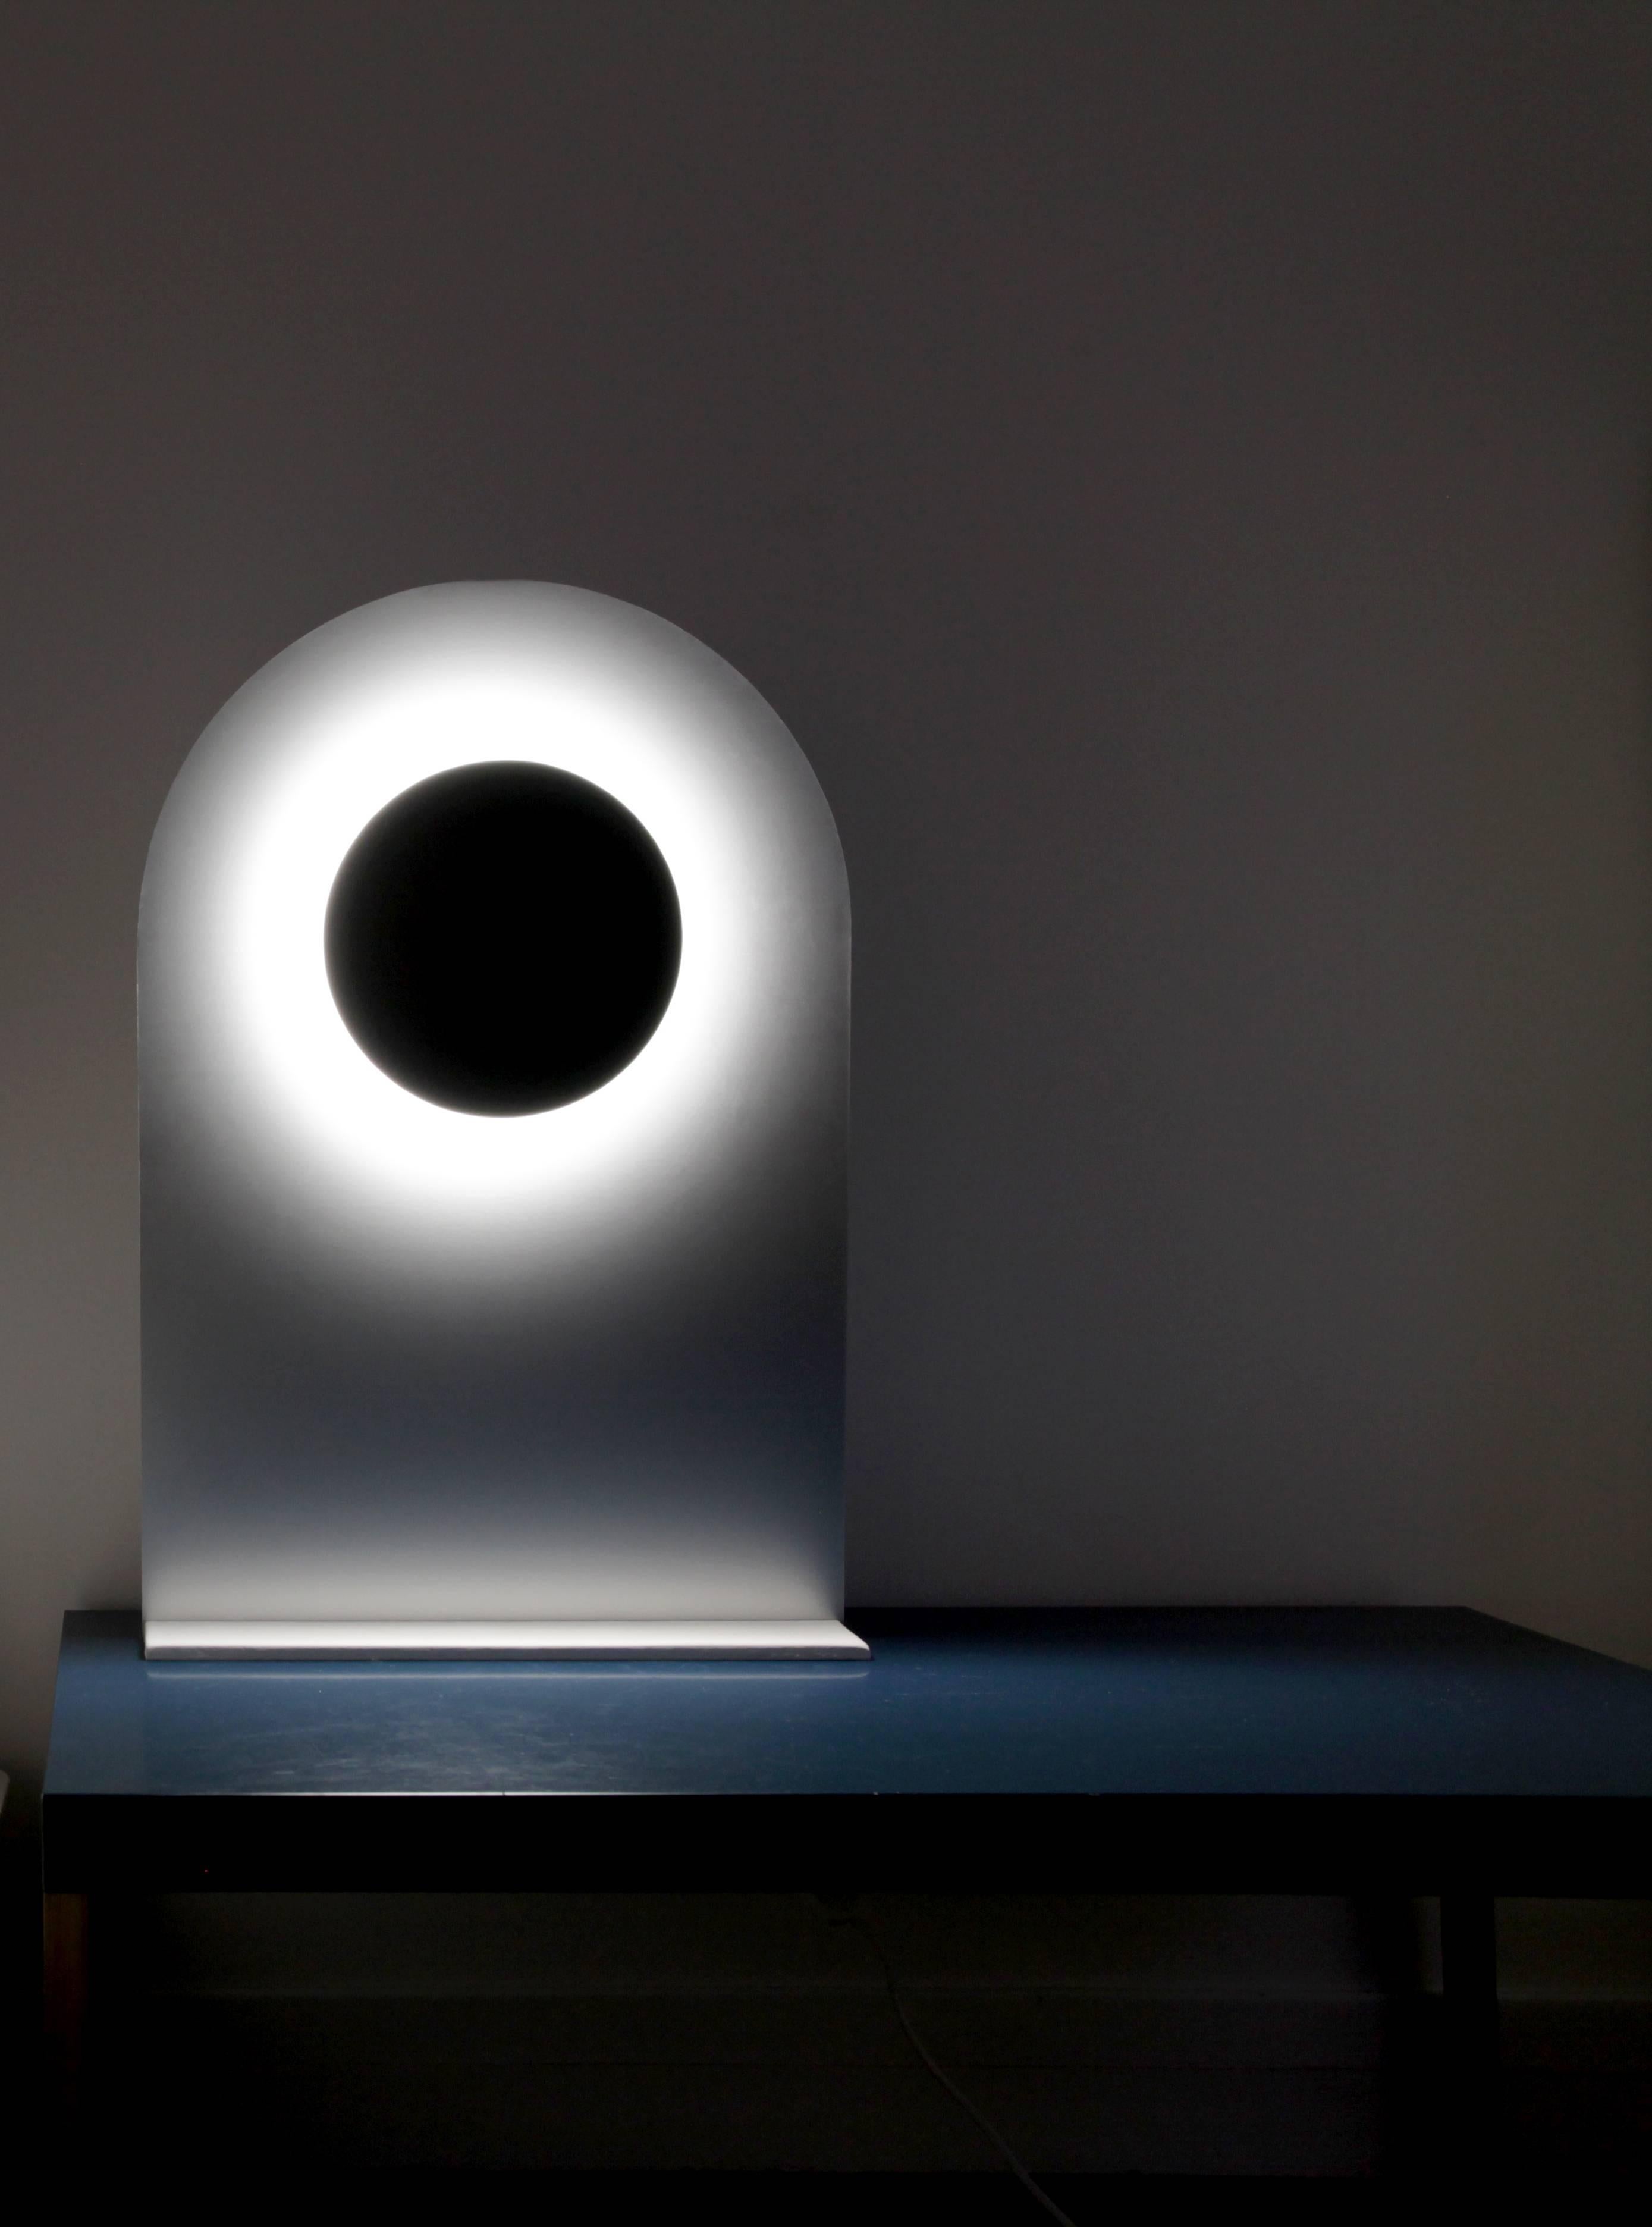 Eclipse table lamp by Arturo Erbsman
Handcrafted design artwork by Arturo Erbsman
Limited Edition, Signed and numbered
Dimensions: 60 x 39 x 12 cm
Materials: anodized aluminum disc, mirror, LED spotlight, wood, recomposed stone base